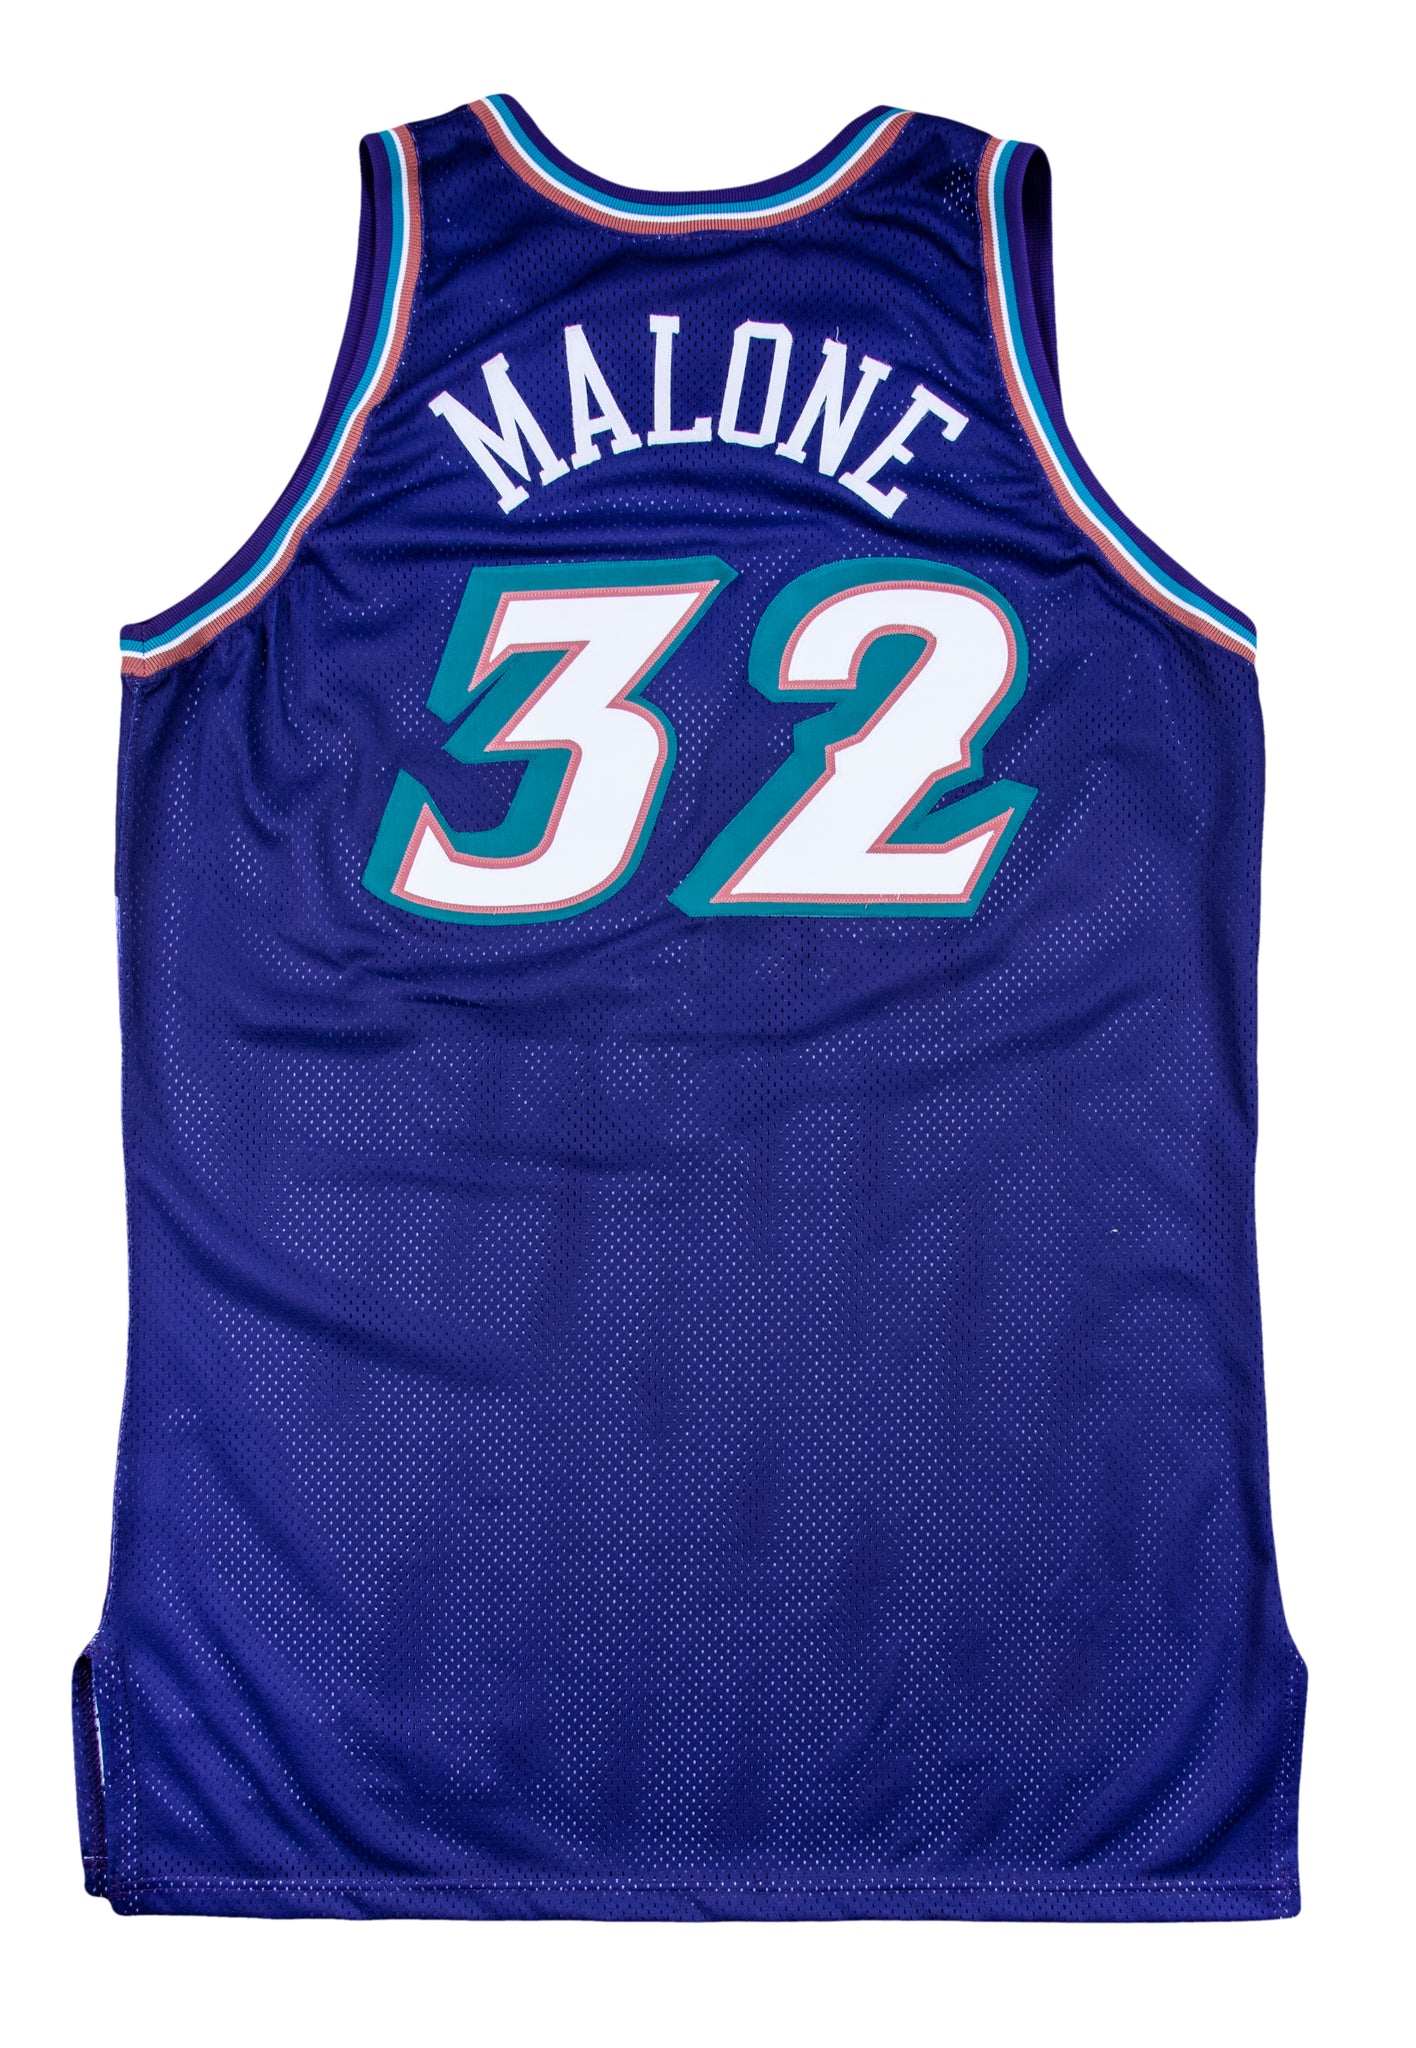 The Utah jazz in the NBA Karl Malone autograph throwback jerseys